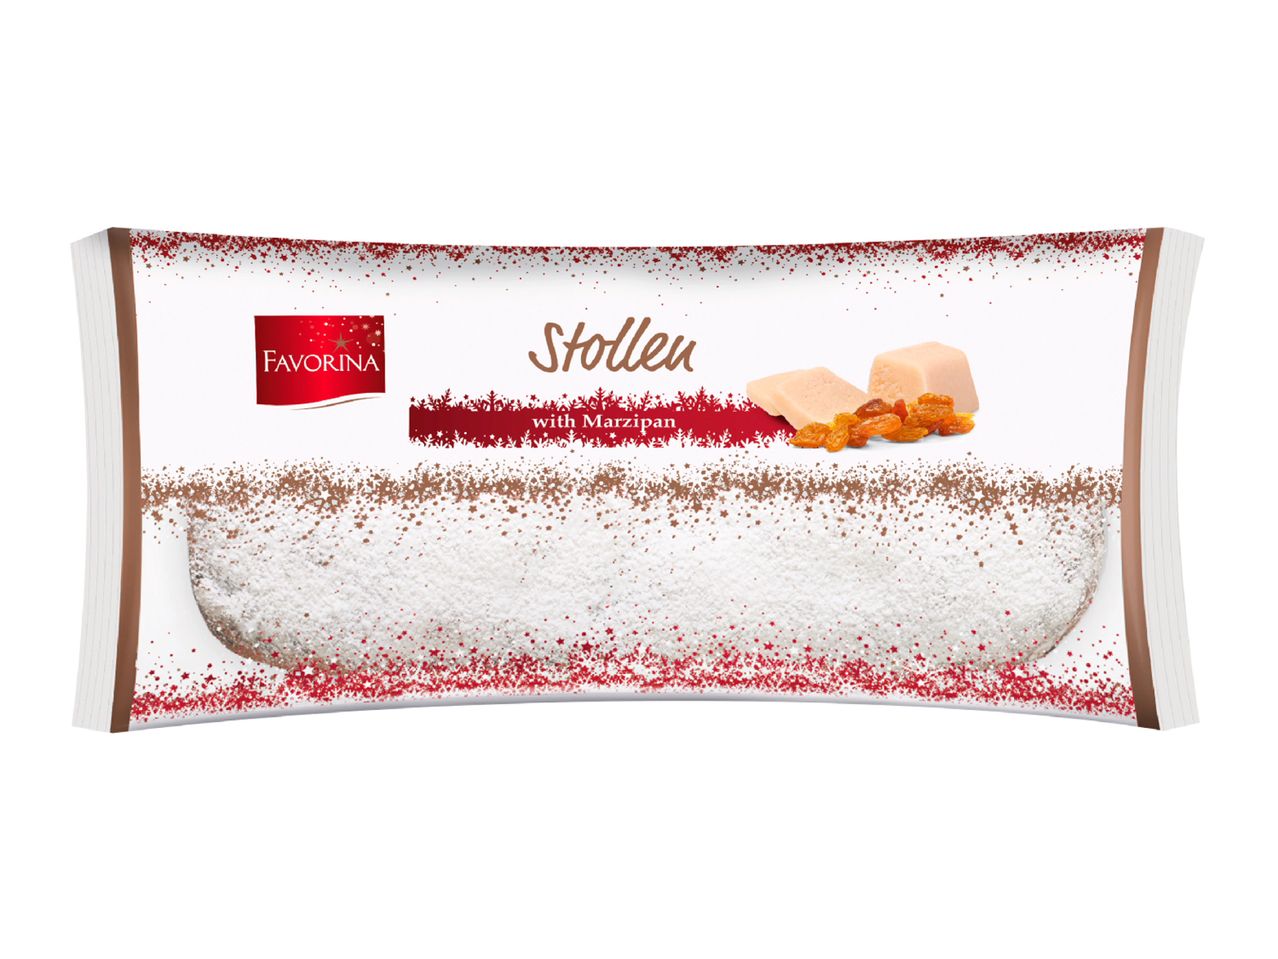 Go to full screen view: Favorina Finest Marzipan Stollen - Image 1